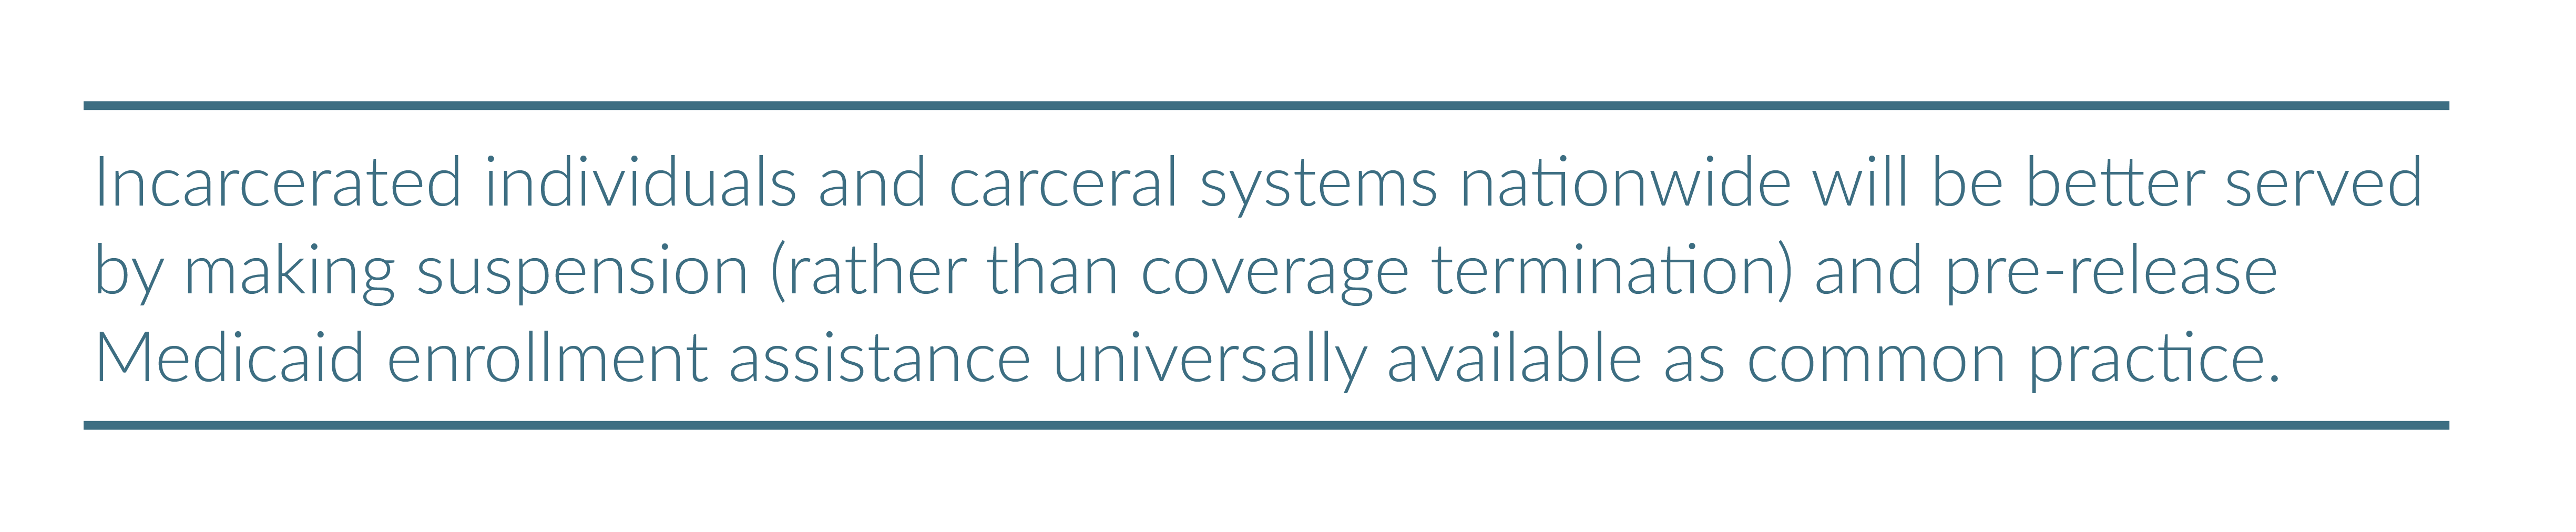 Incarcerated individuals and carceral systems nationwide will be better served by making suspension (rather than coverage termination) and pre-release Medicaid enrollment assistance universally available as common practice.